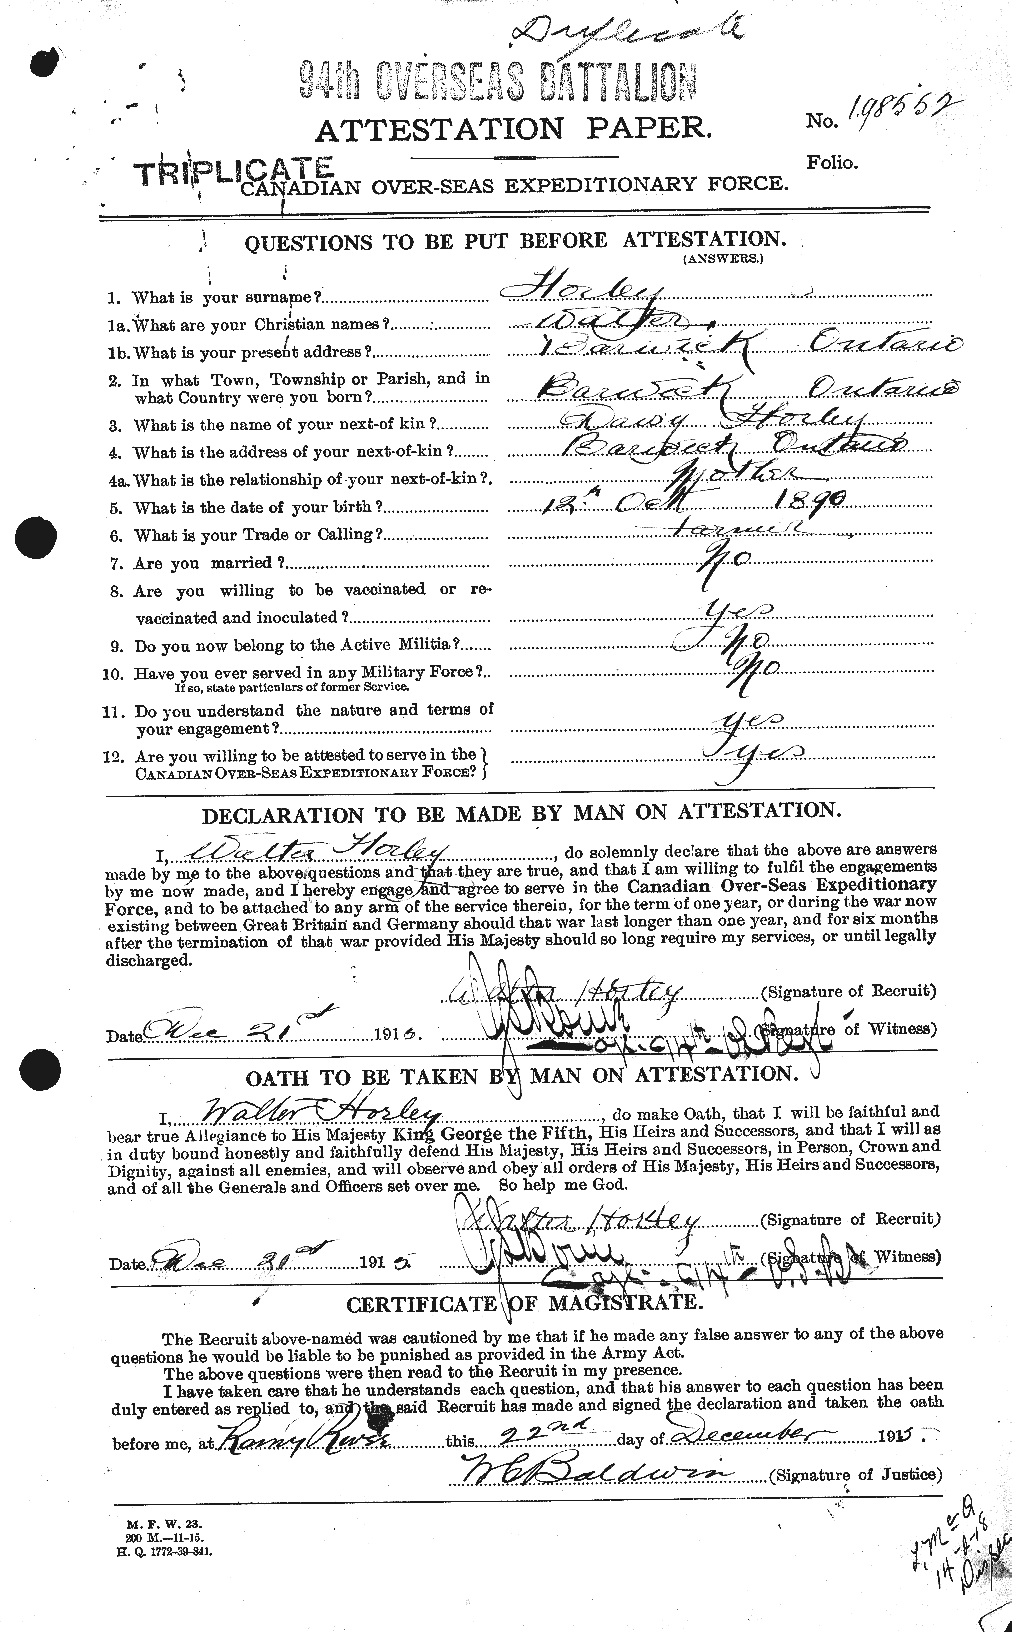 Personnel Records of the First World War - CEF 399388a